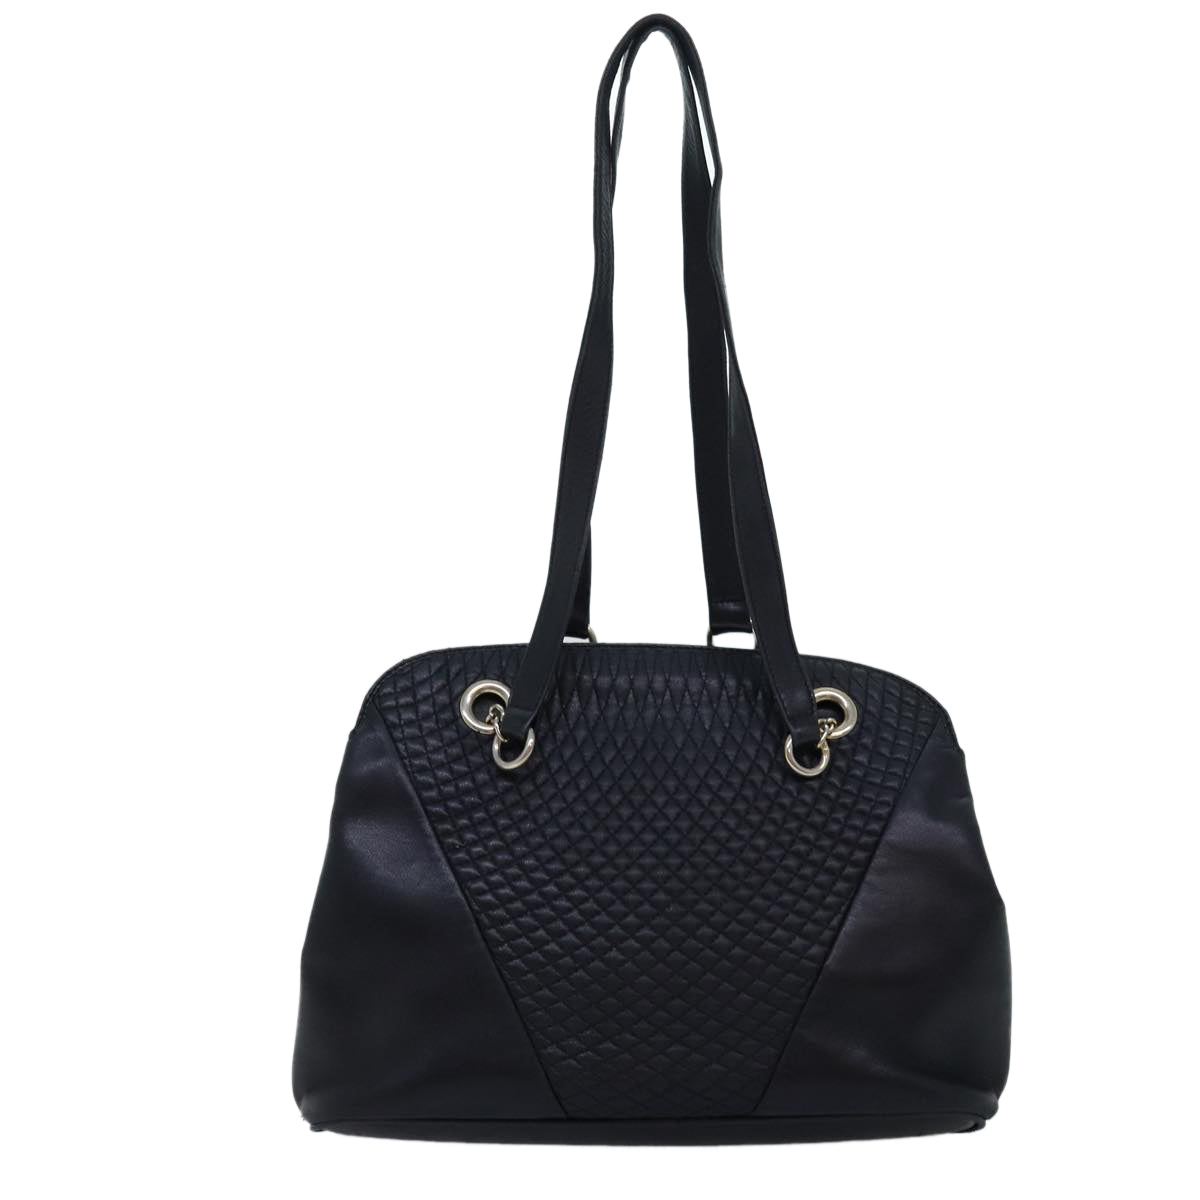 BALLY Quilted Shoulder Bag Leather Black Auth yb554